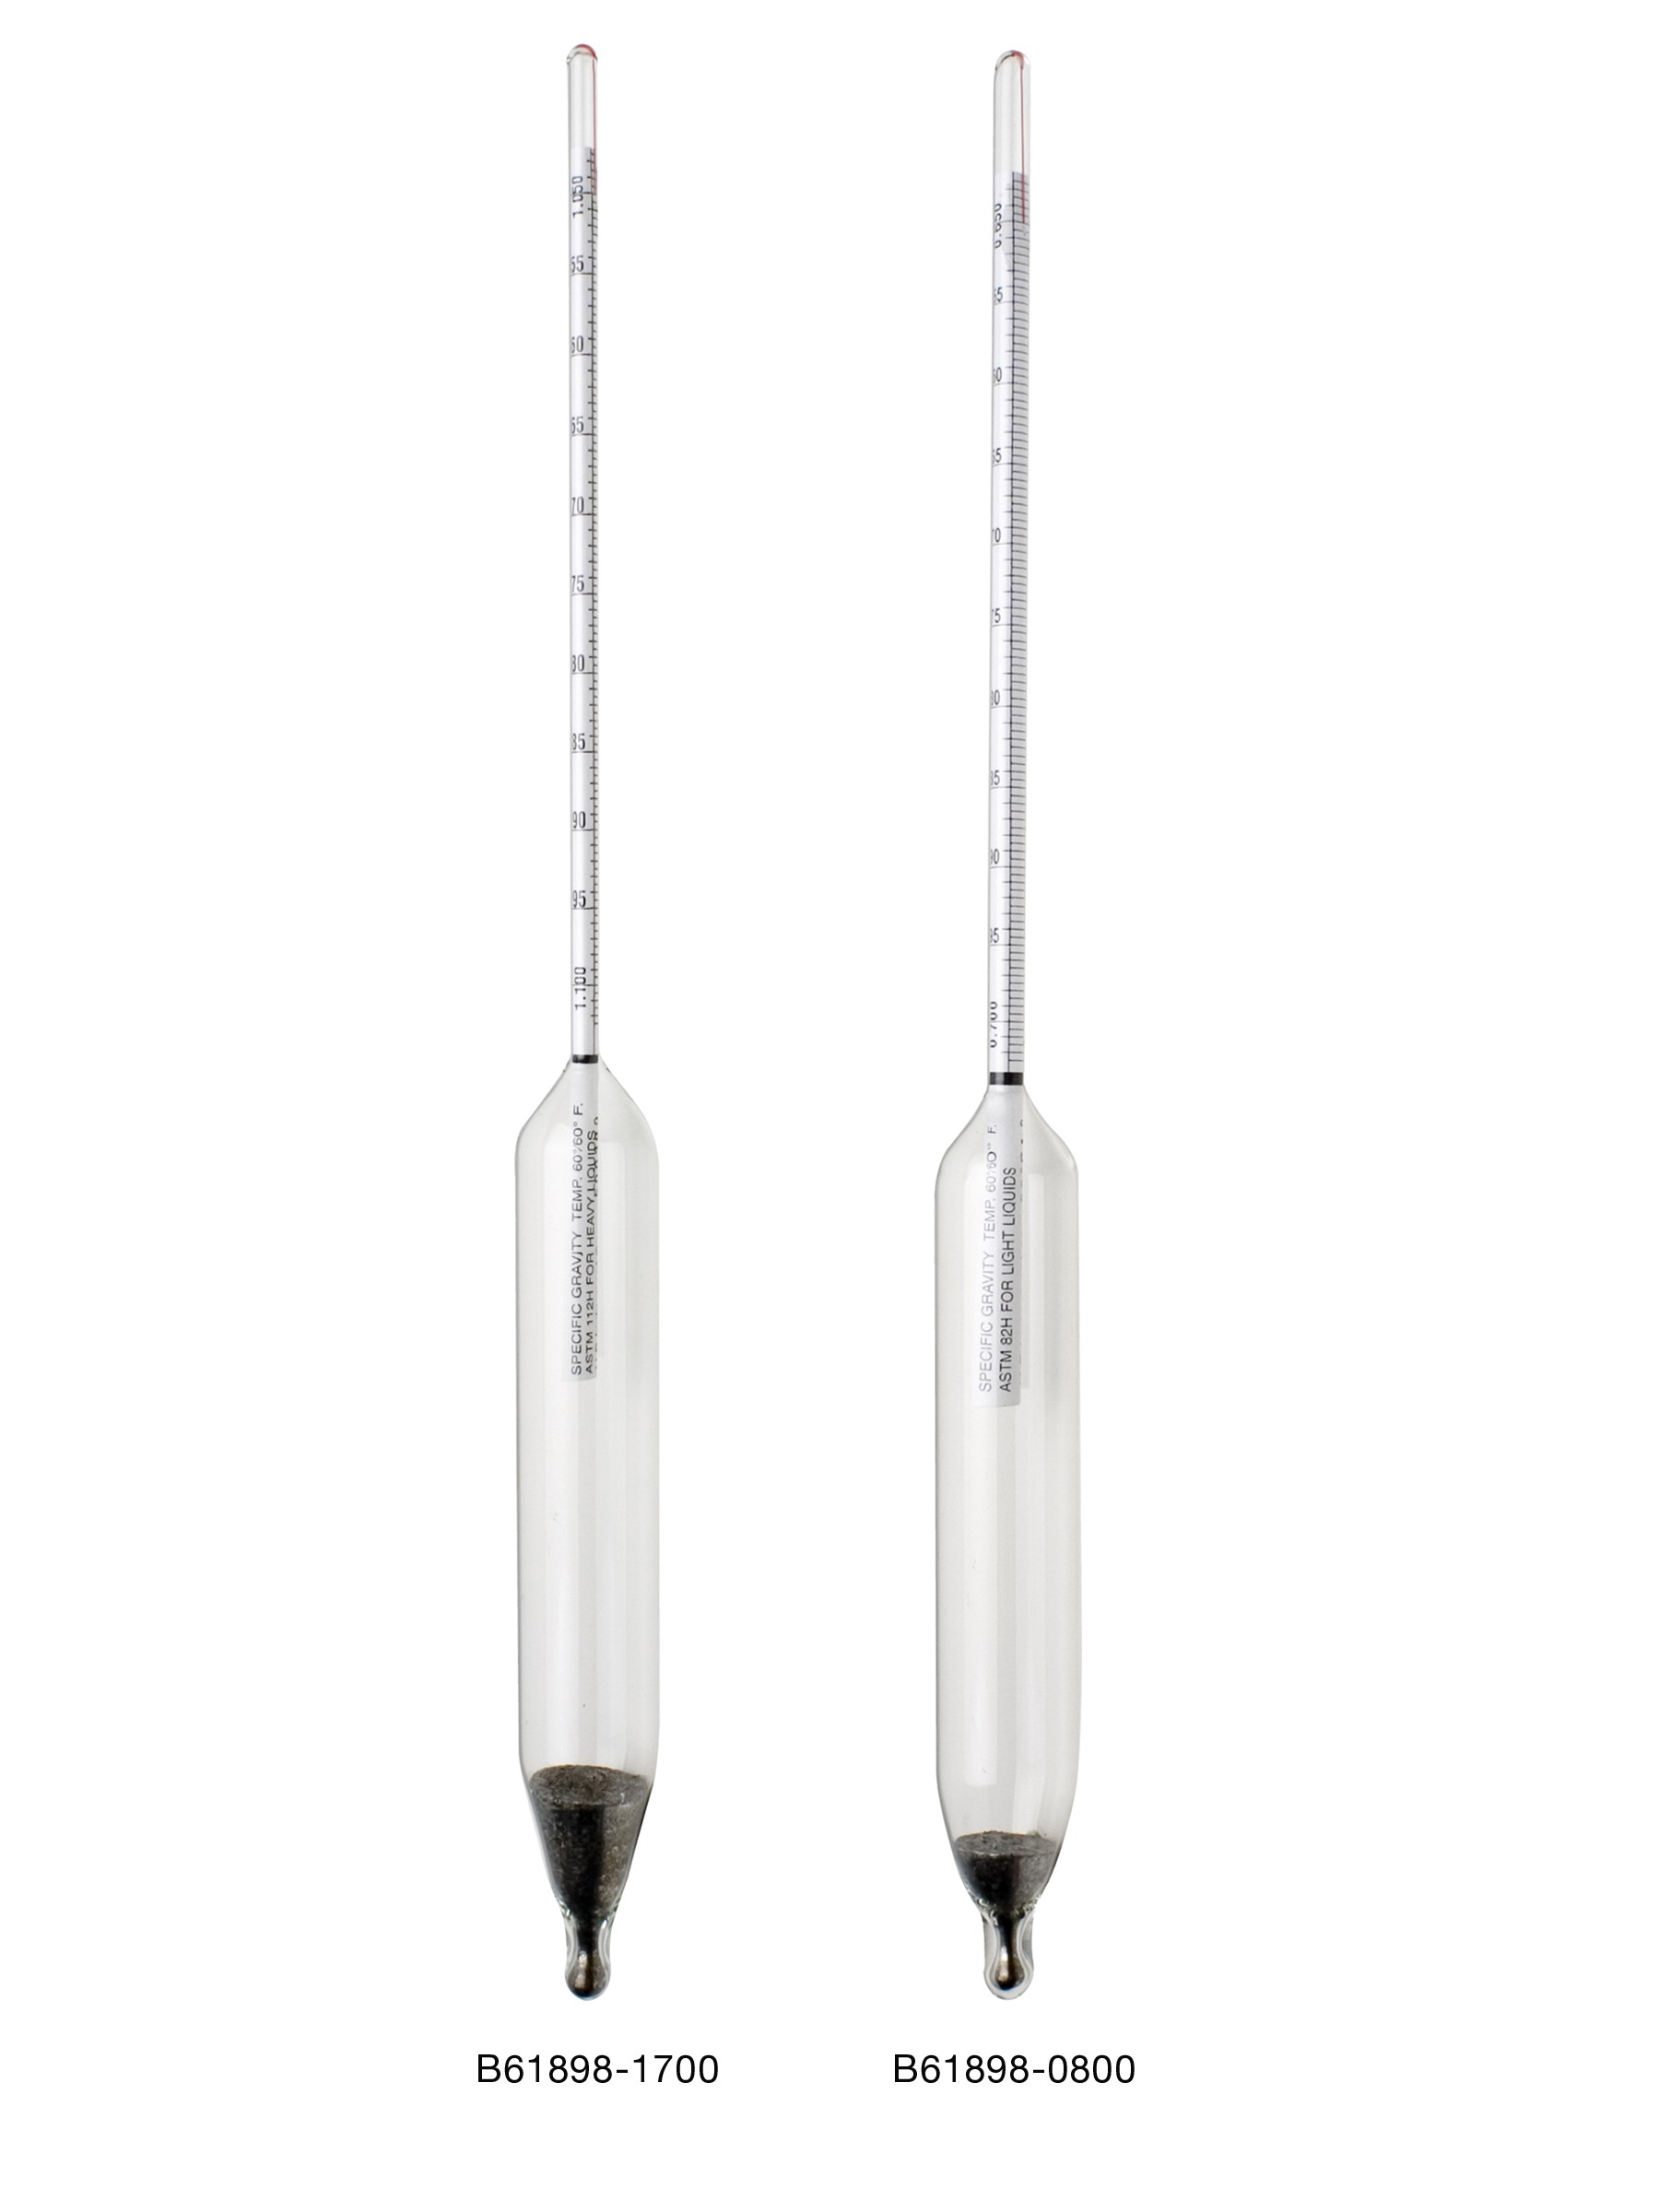 H-B DURAC ASTM Precision Specific Gravity Hydrometers with Individual Calibration Report; Traceable to NIST